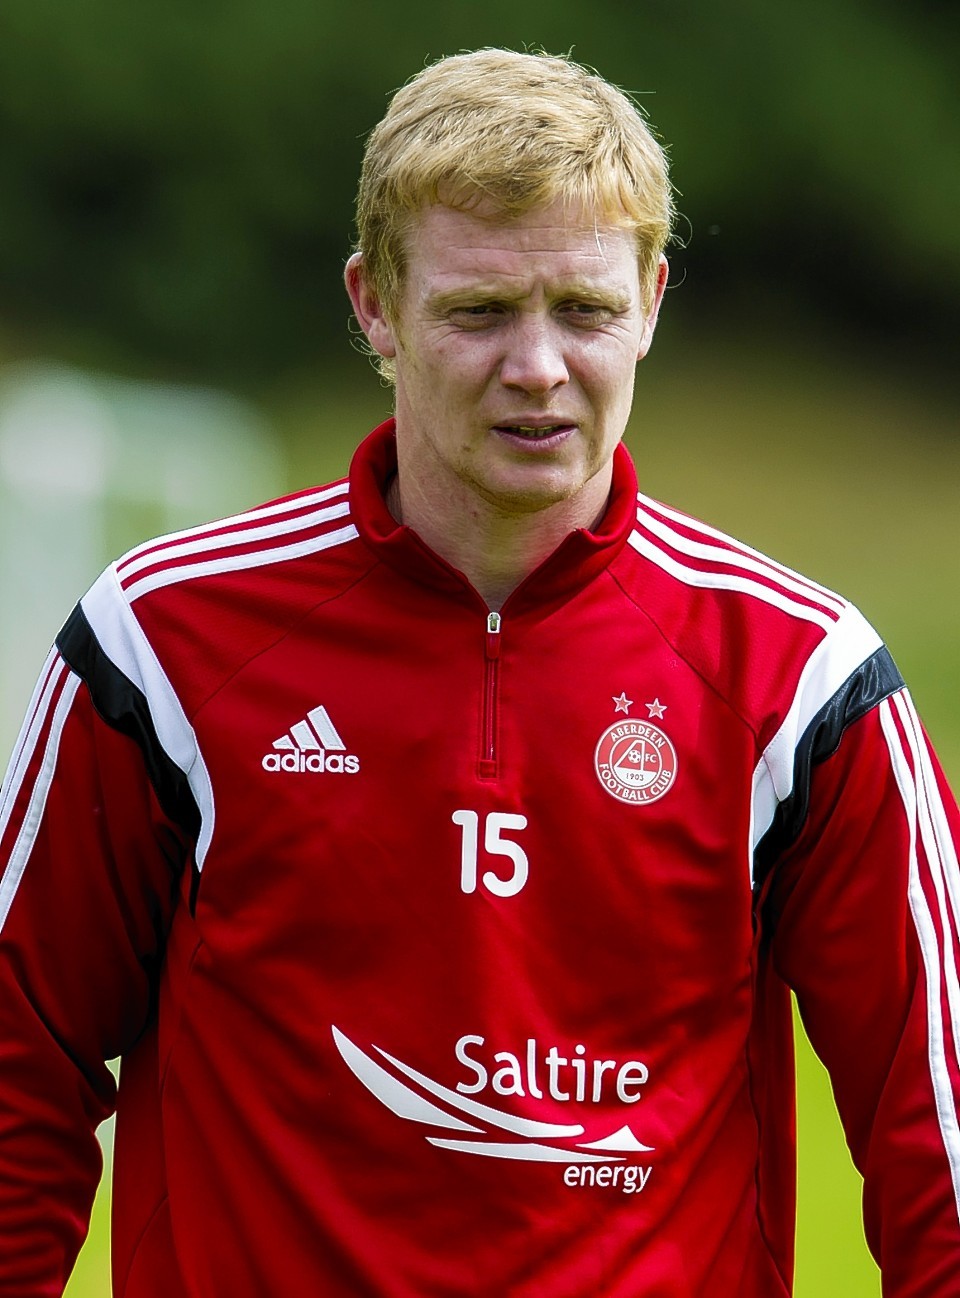 Midfielder Barry Robson is one of a number of experienced players on the frignes of the Dons team